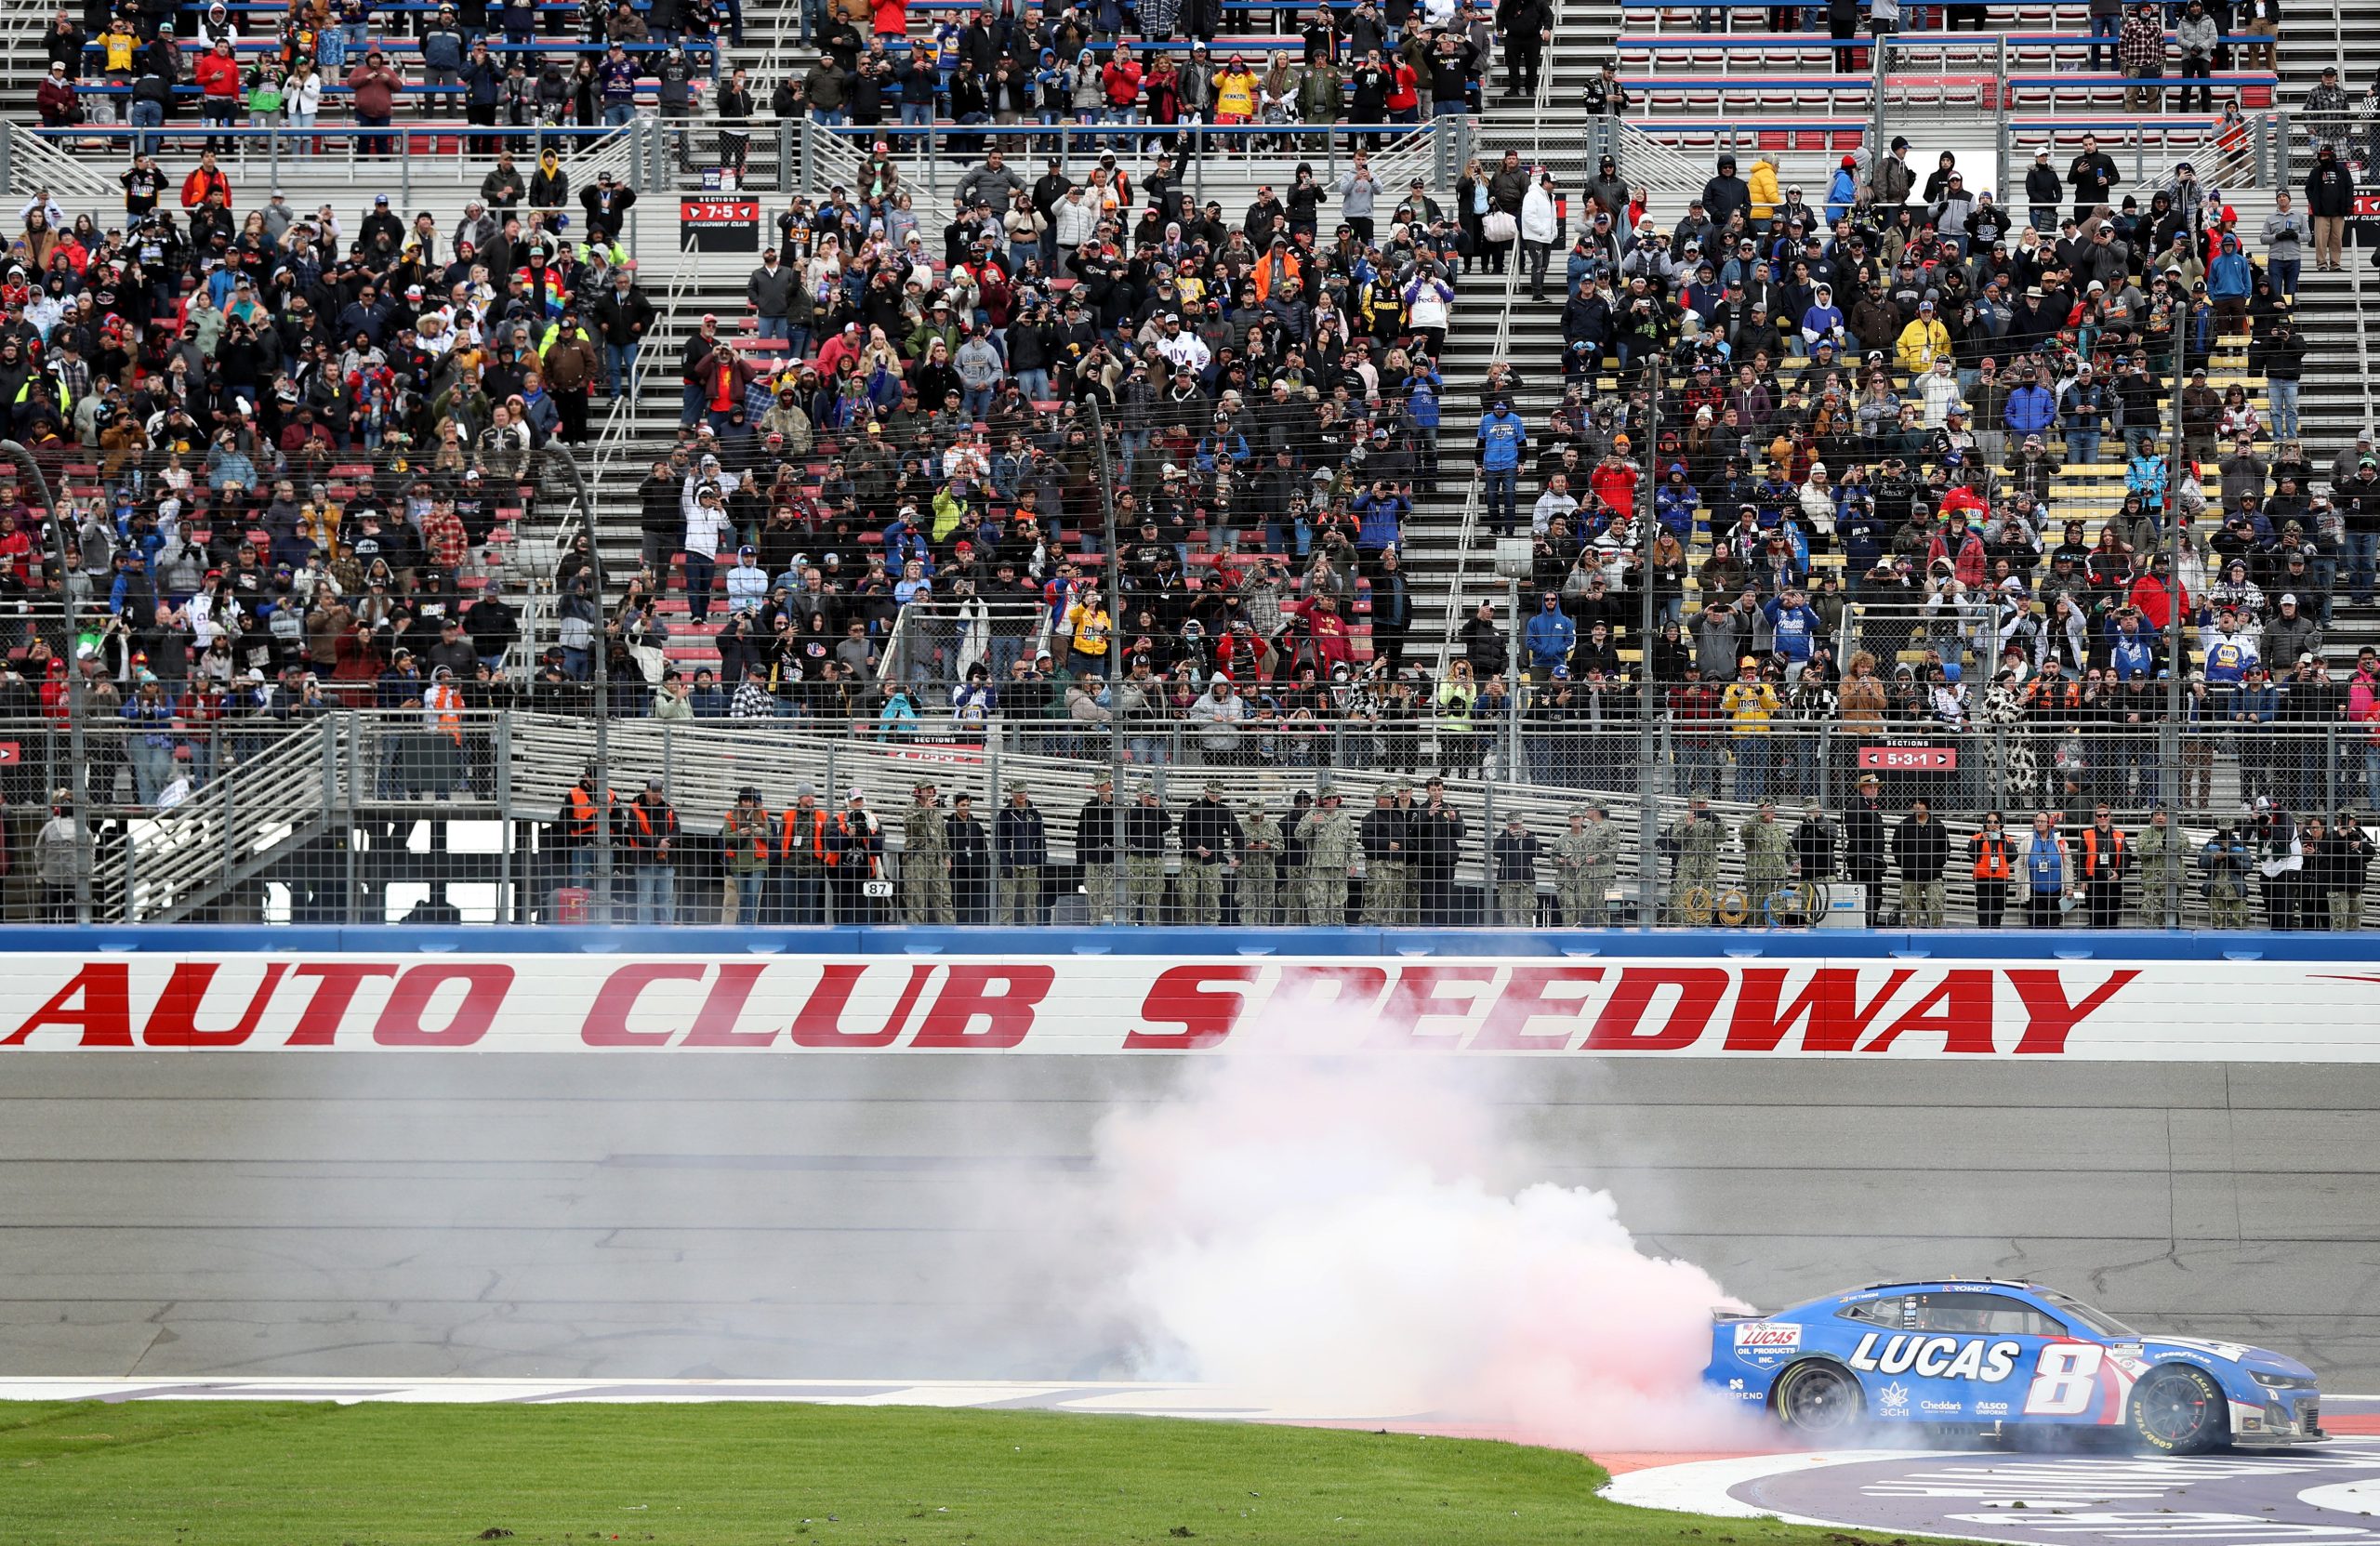 FONTANA, CALIFORNIA - FEBRUARY 26: Kyle Busch, driver of the #8 Lucas Oil Chevrolet, celebrates with a burnout after winning the NASCAR Cup Series Pala Casino 400 at Auto Club Speedway on February 26, 2023 in Fontana, California. (Photo by Meg Oliphant/Getty Images)